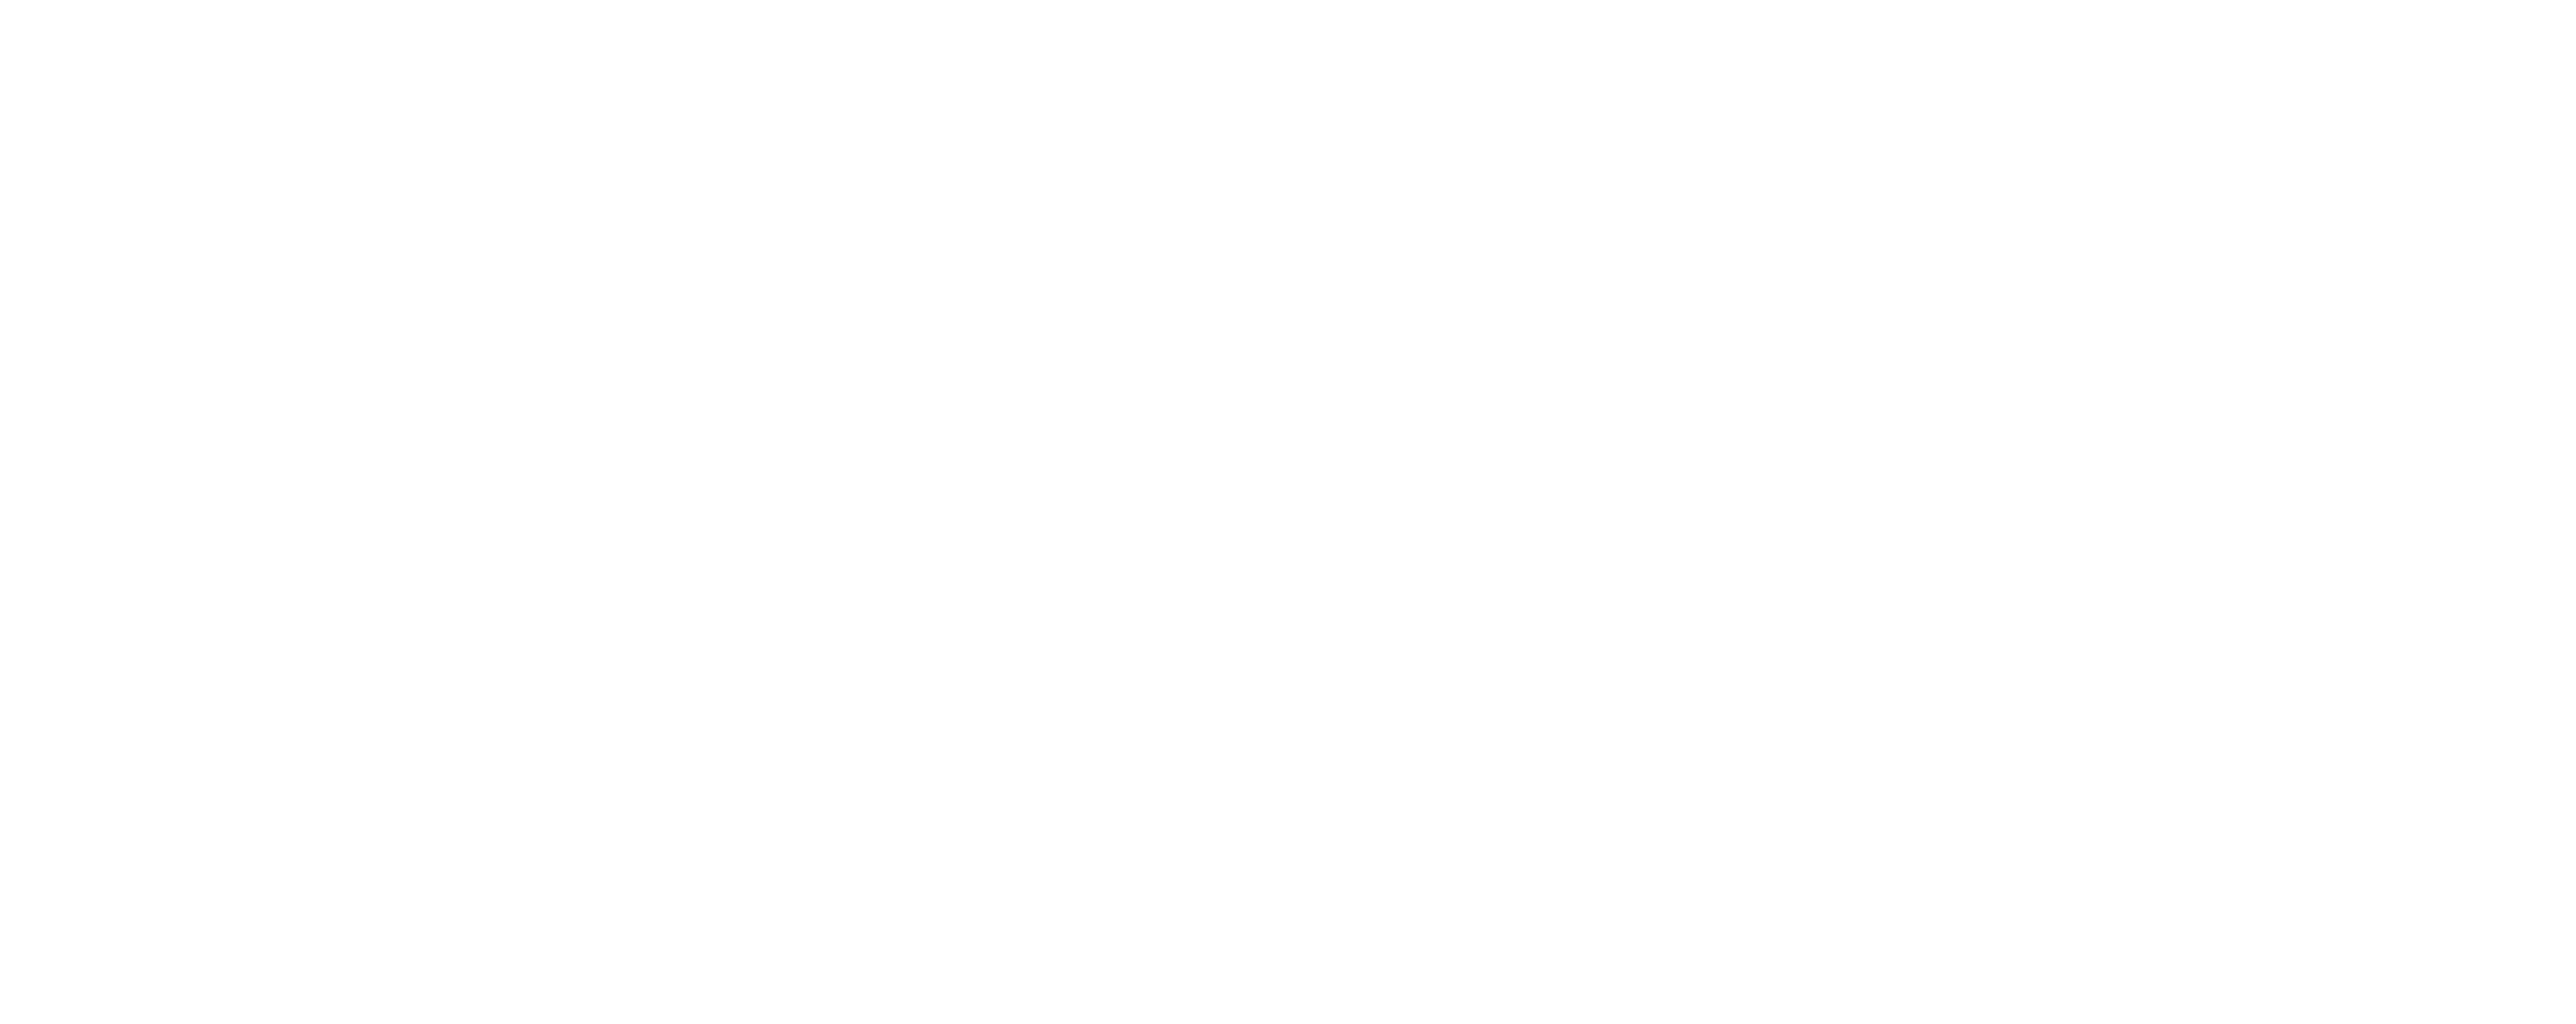 Black and white Product Pattern.